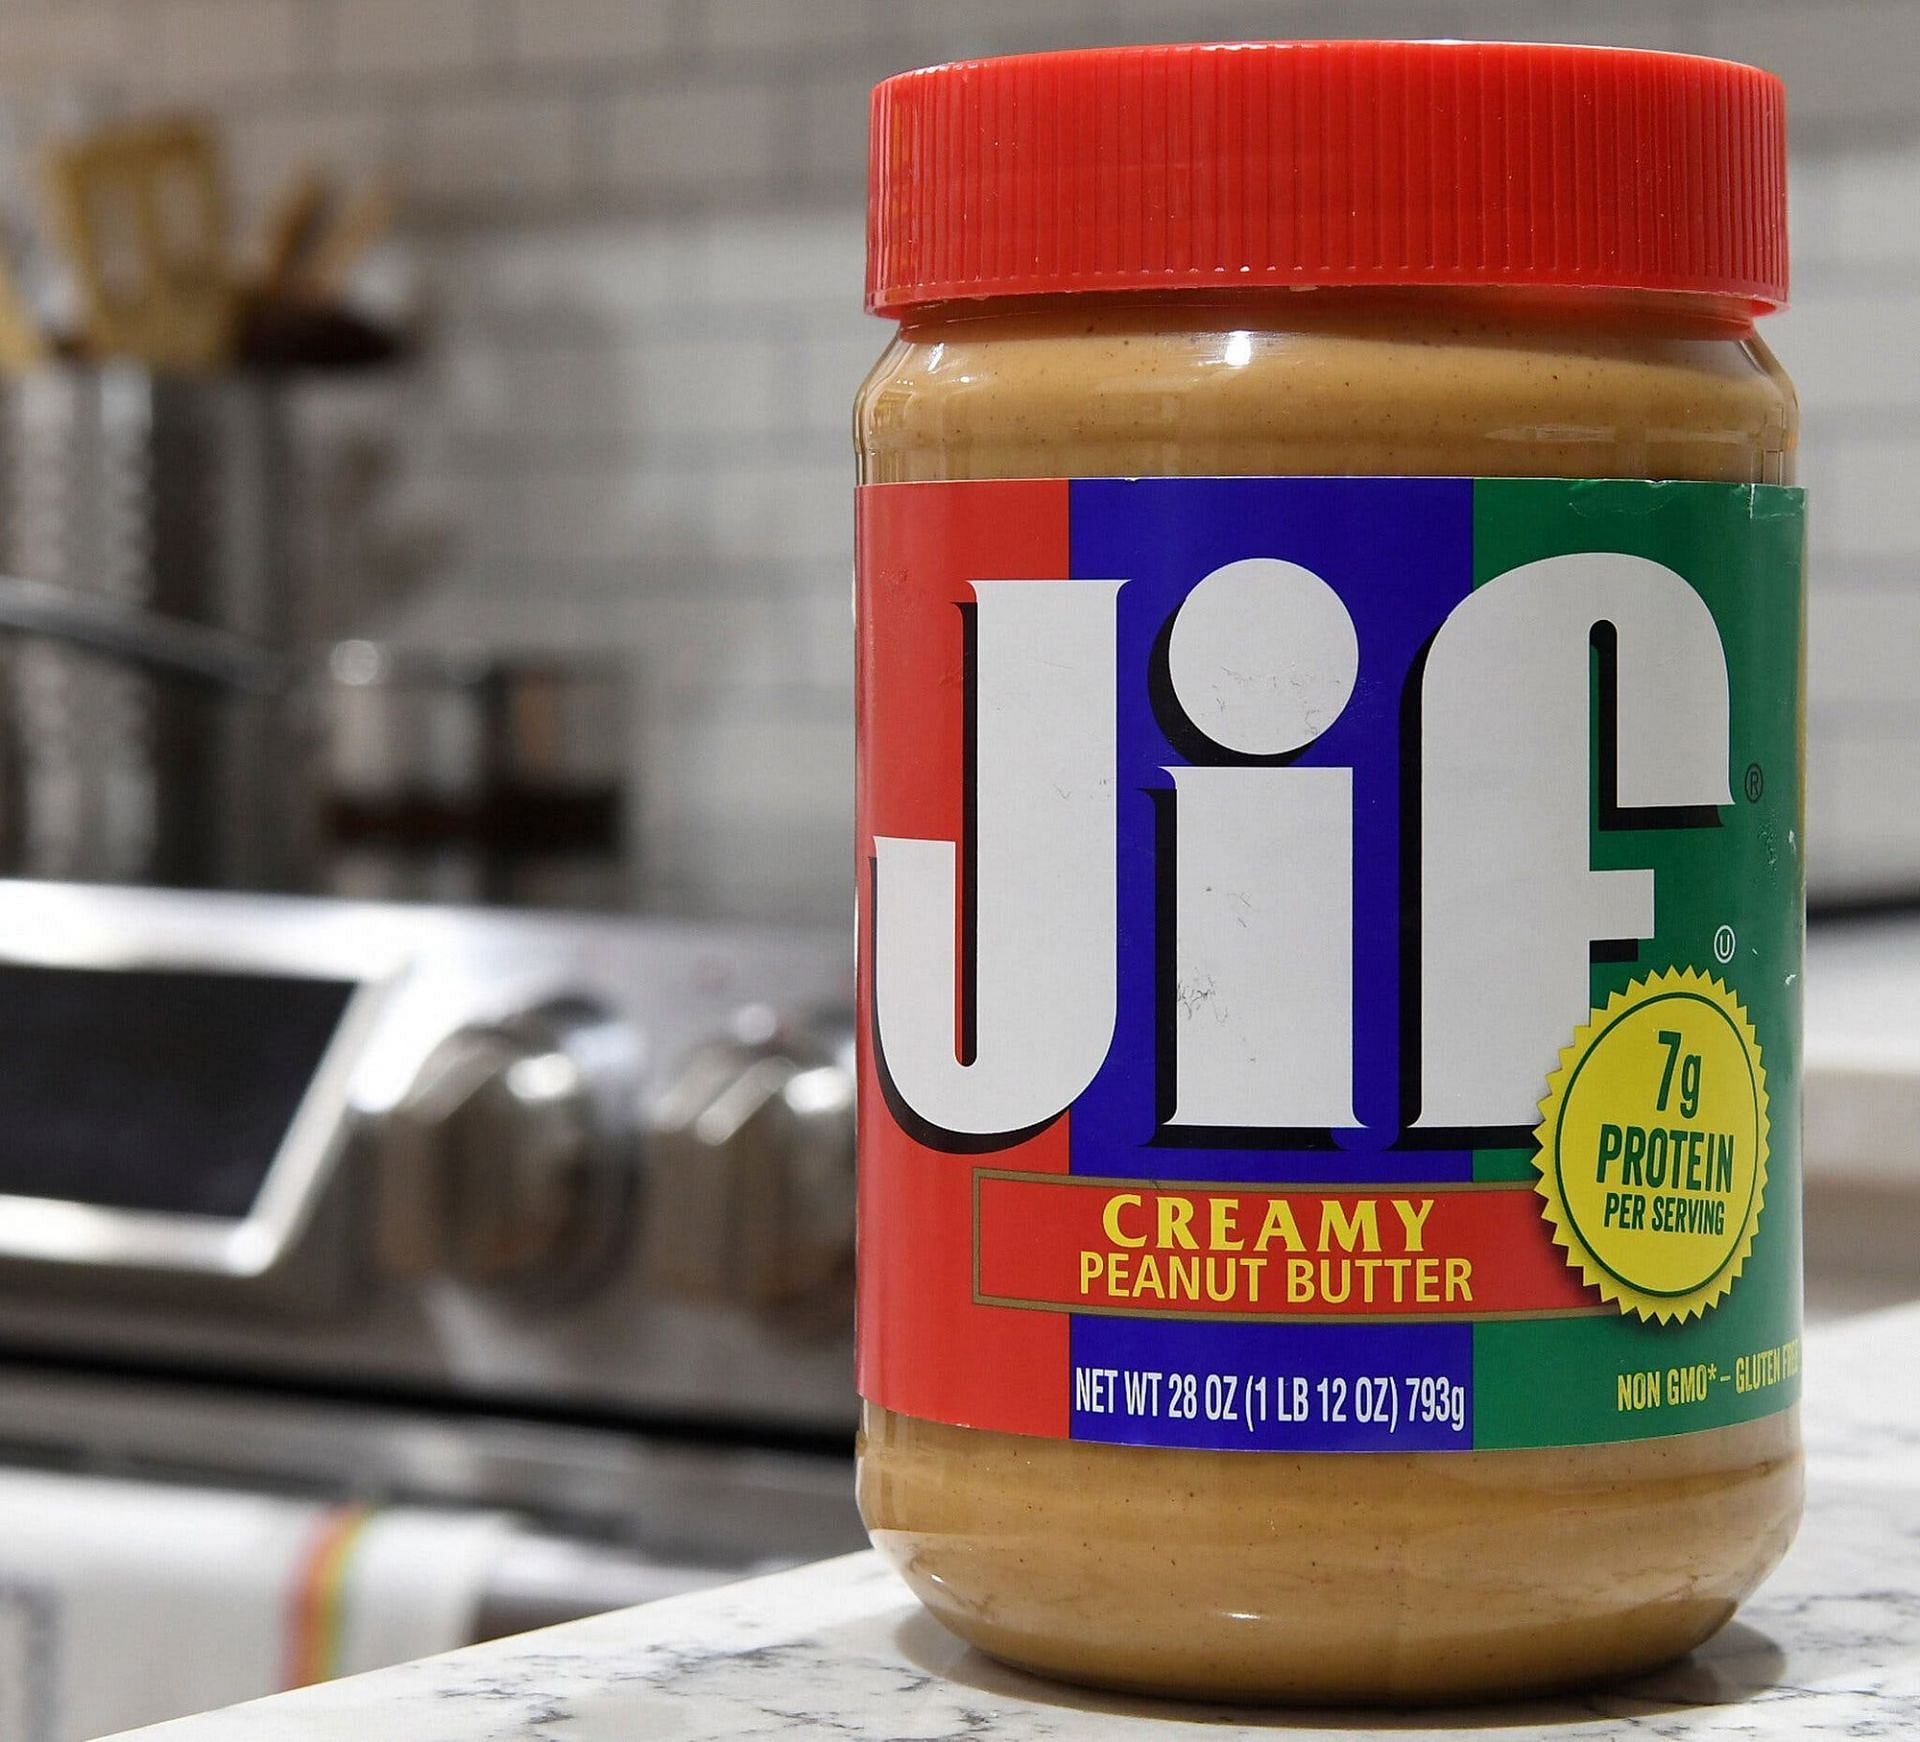 How to find the lot number on the recalled peanut butter revealed (Image via AP)